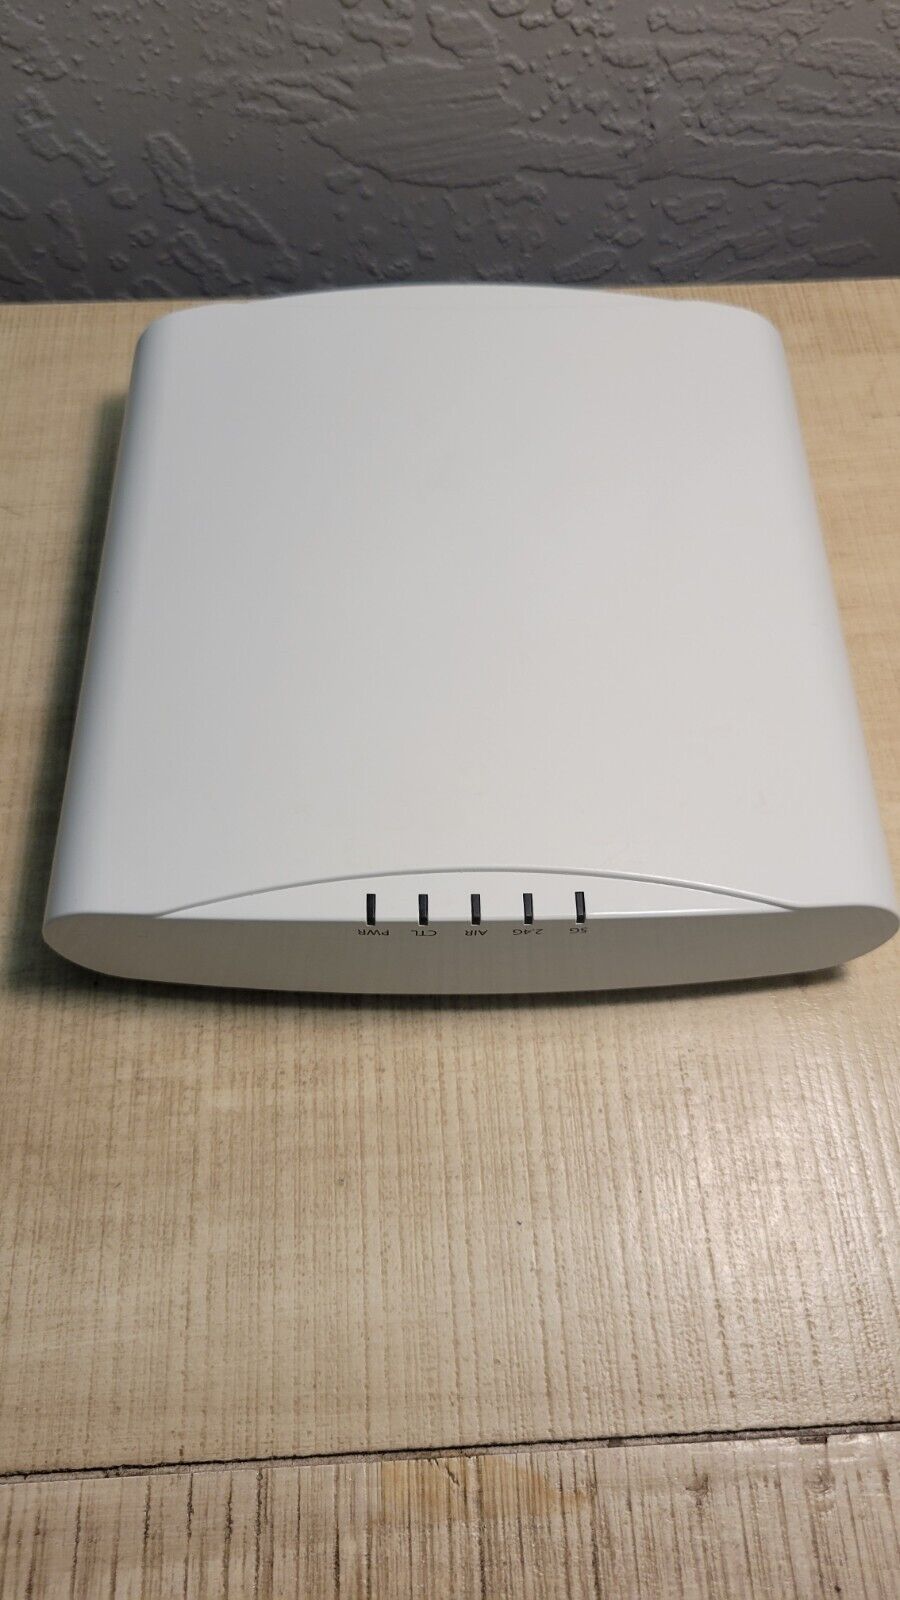 Ruckus 901-R610-US00 R610 Wireless Access Point, AP's only